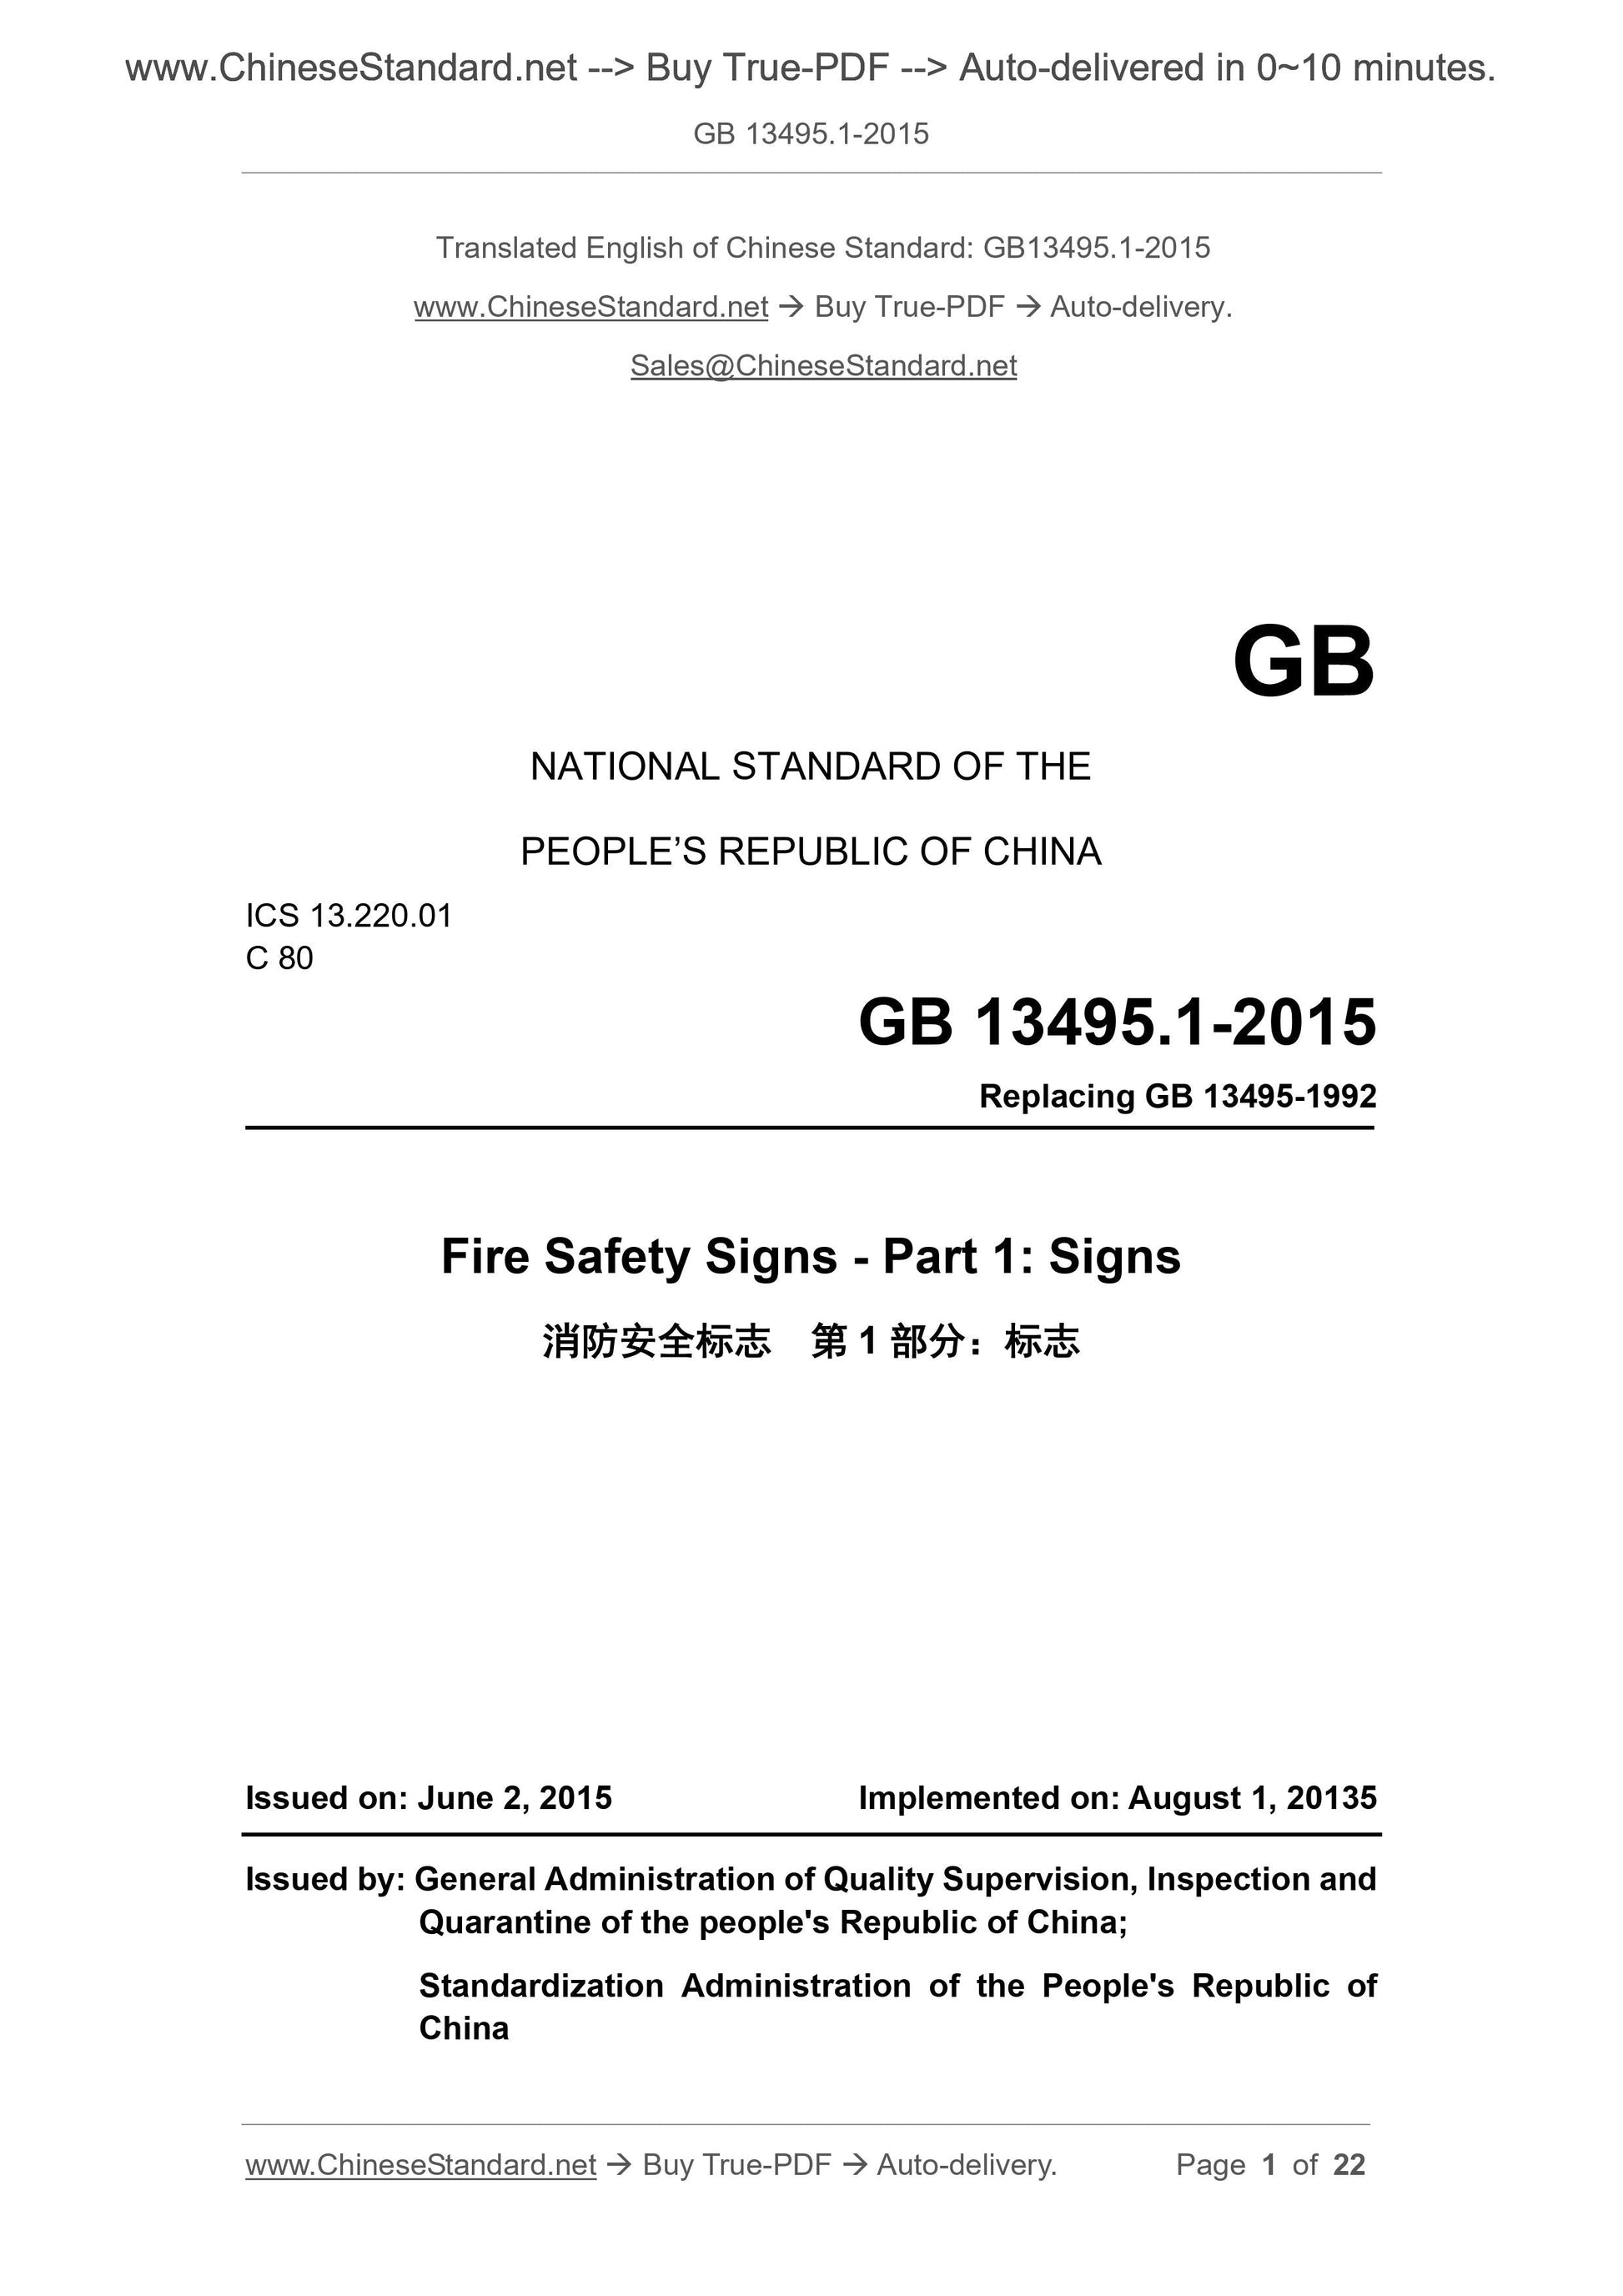 GB 13495.1-2015 Page 1